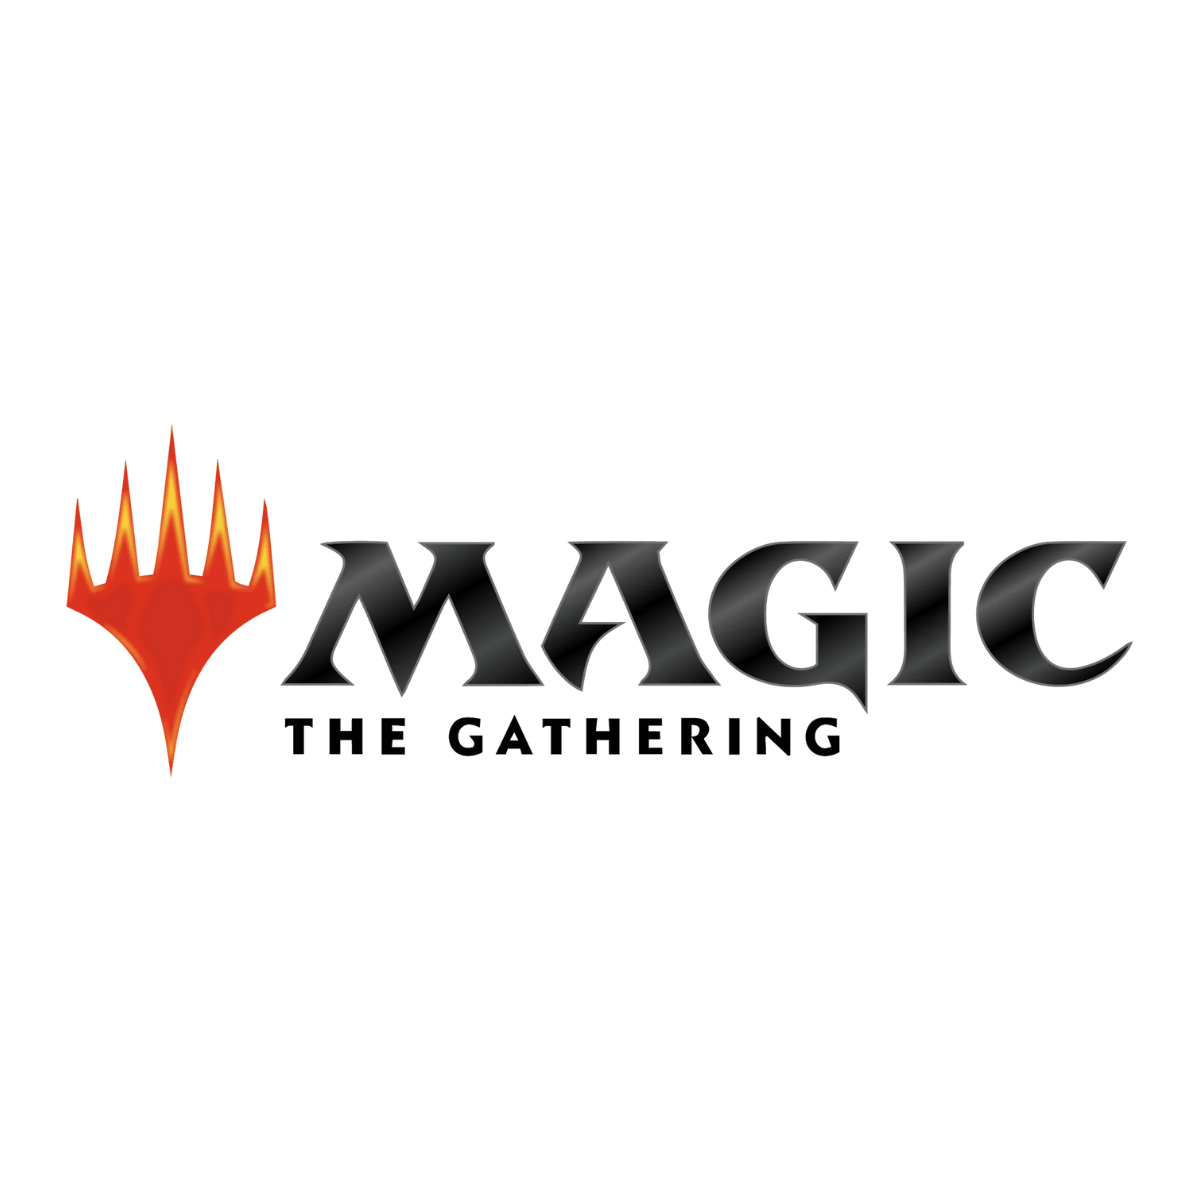 Magic: The Gathering Character Sleeve Collection [MTGS-231] &quot;Dominaria United - Vodalian Hexcatcher&quot;-Ensky-Ace Cards &amp; Collectibles